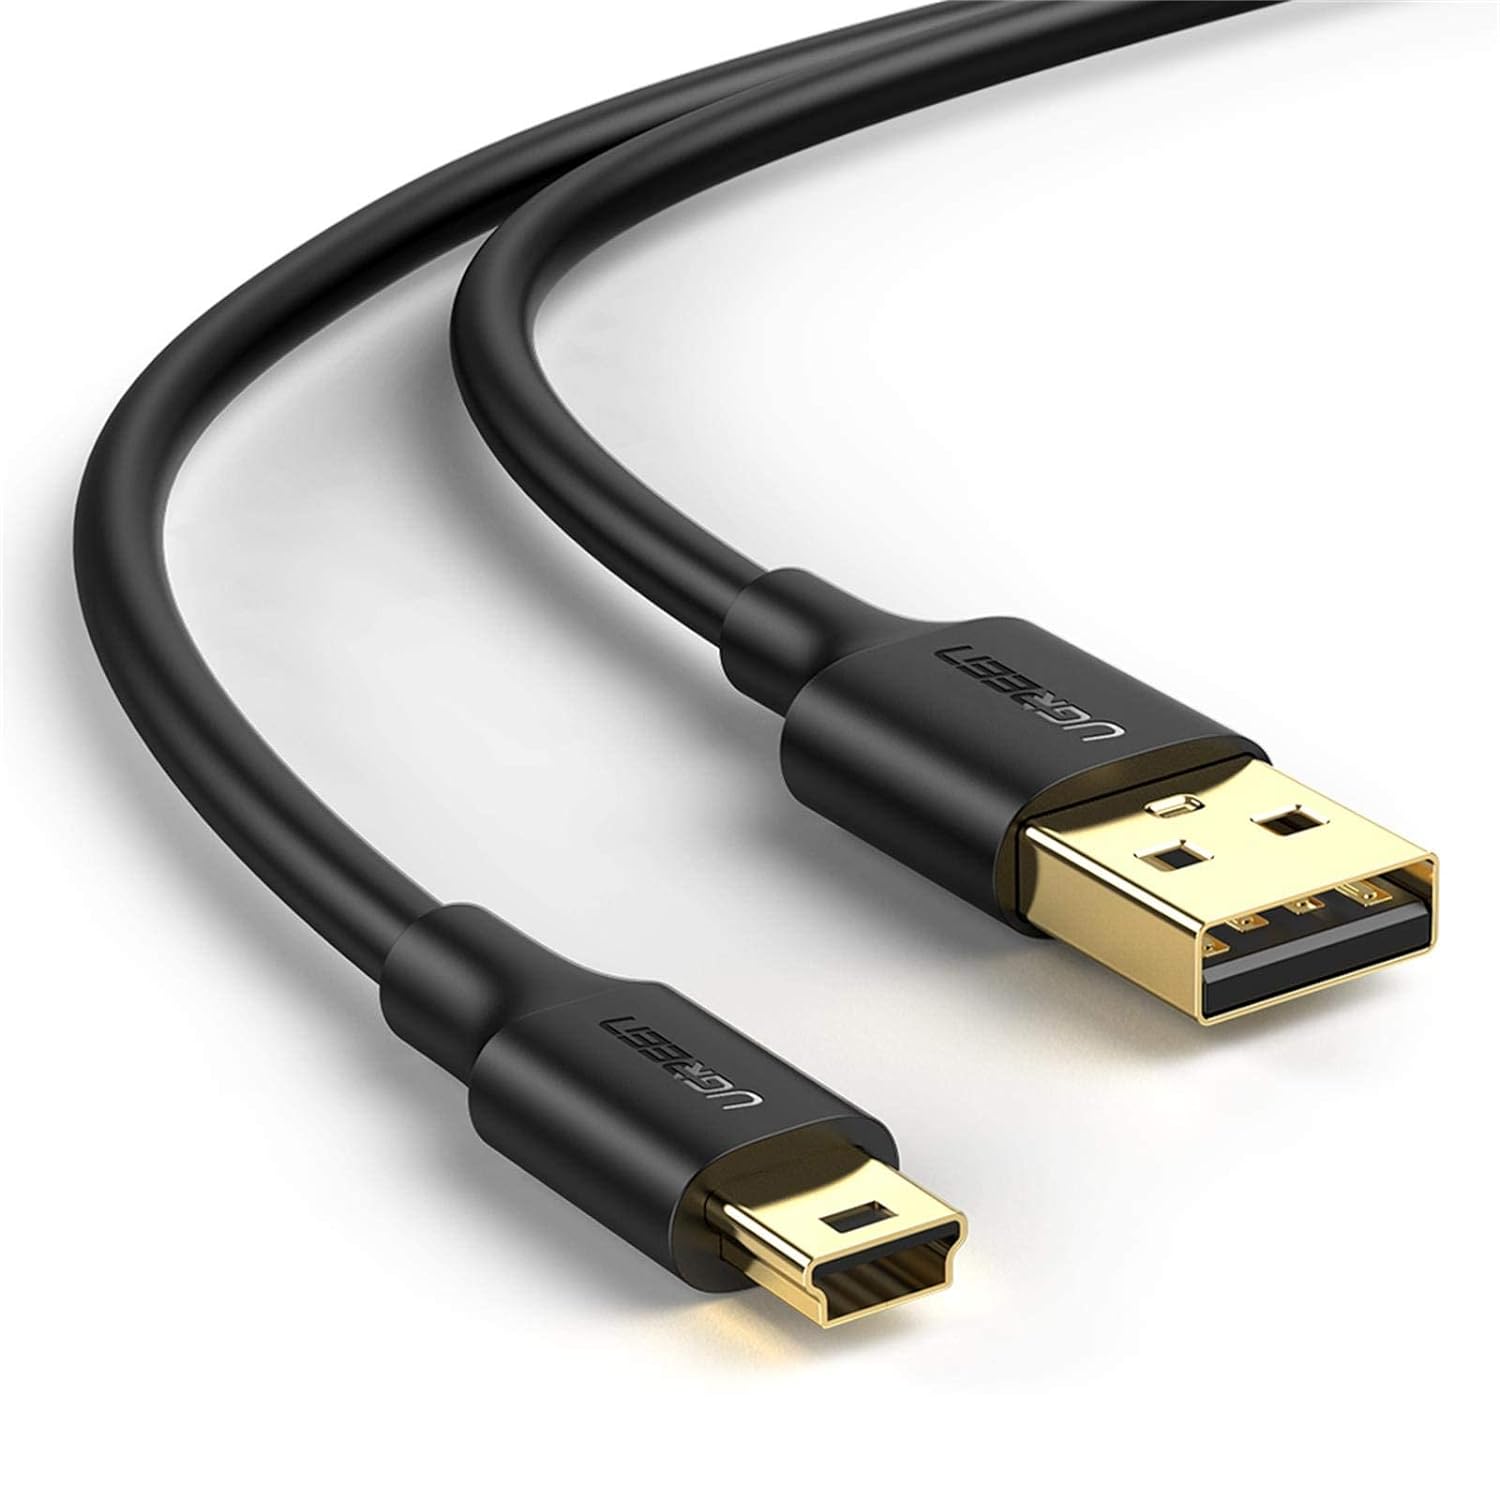 Mini Usb Cable  A-Male To Mini-B Cord USB 2.0 Charger Cable